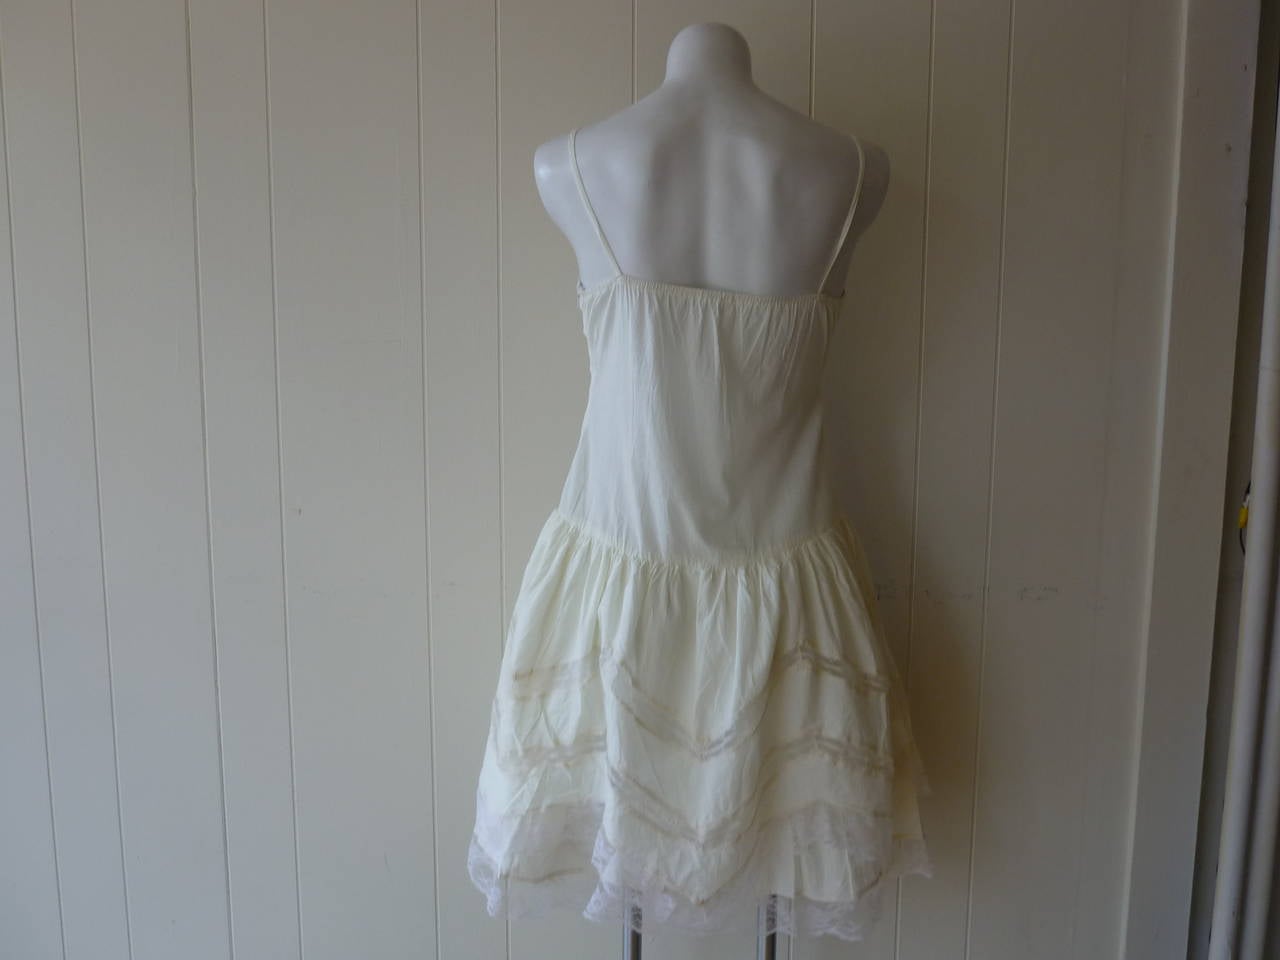 Ivory cotton dress with a drop waist and lace around the bust line as well as the skirt (two layers). Wear it to a garden party or dress it up for dinner!